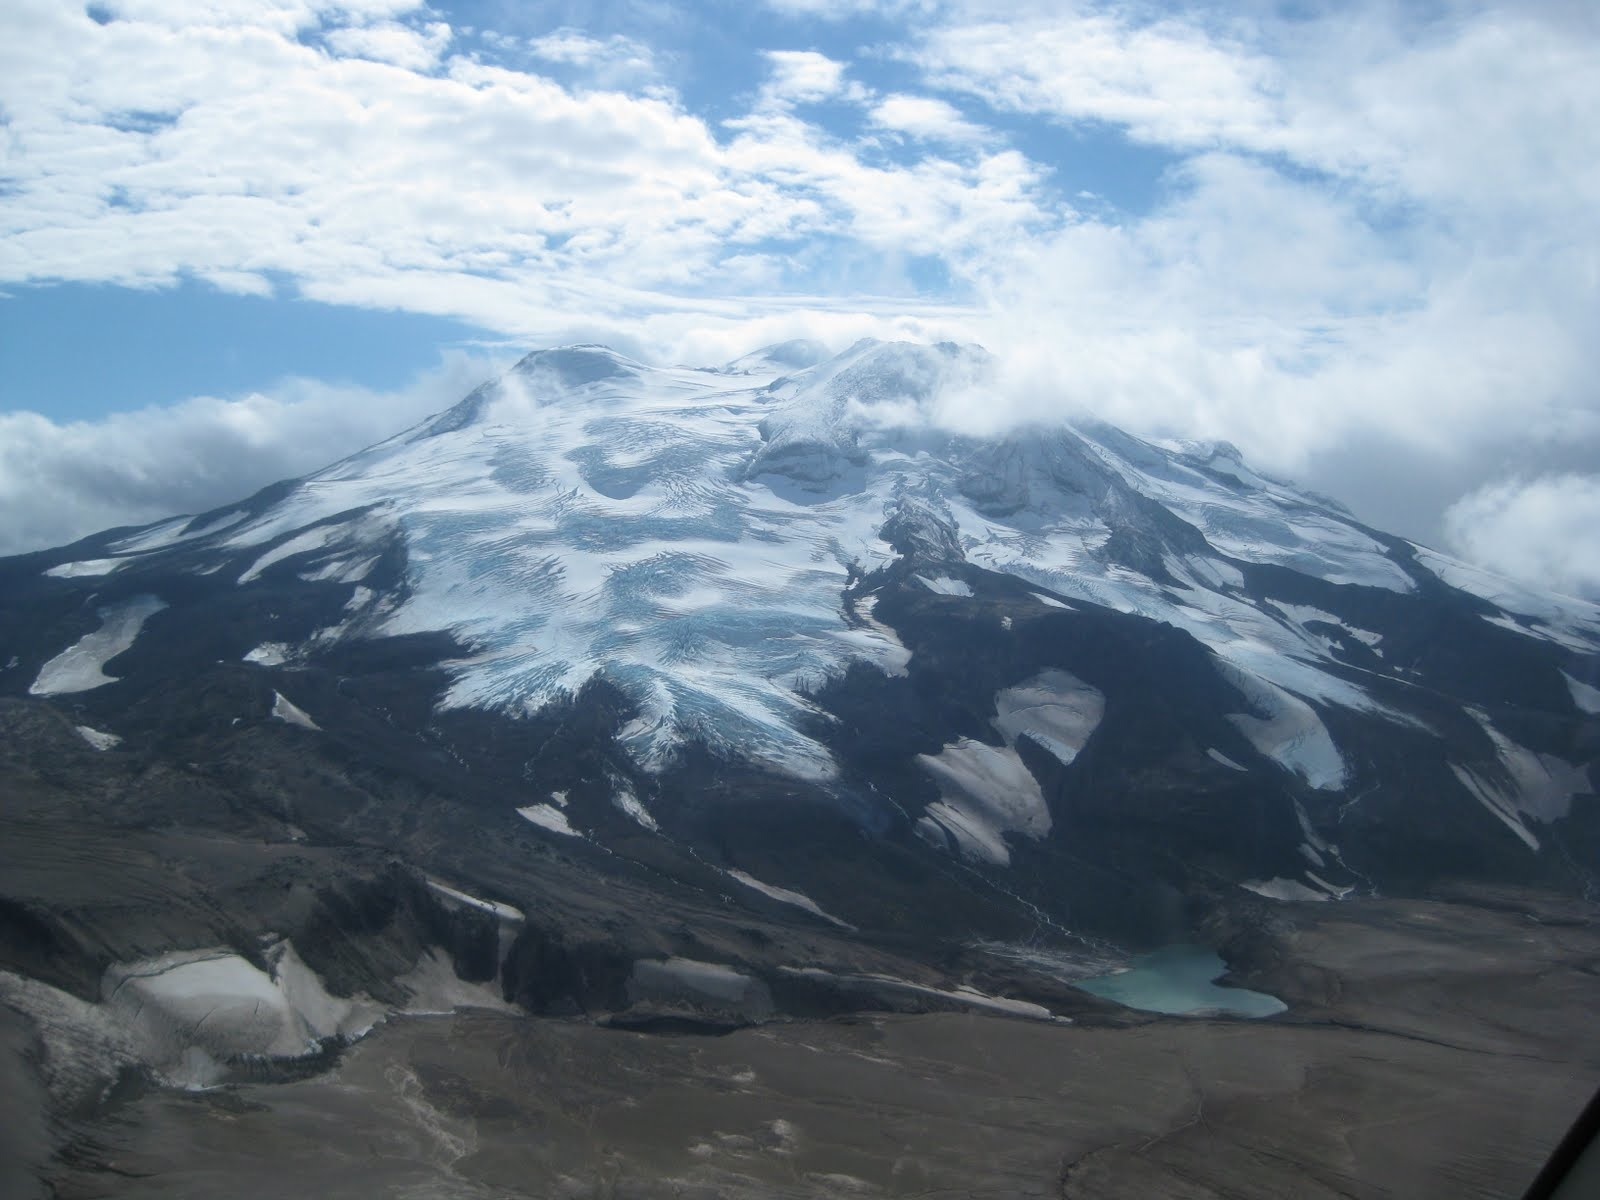 A glacier-capped volcano rises through broken clouds and sunshine. A blue lake sits at the base of the volcano.